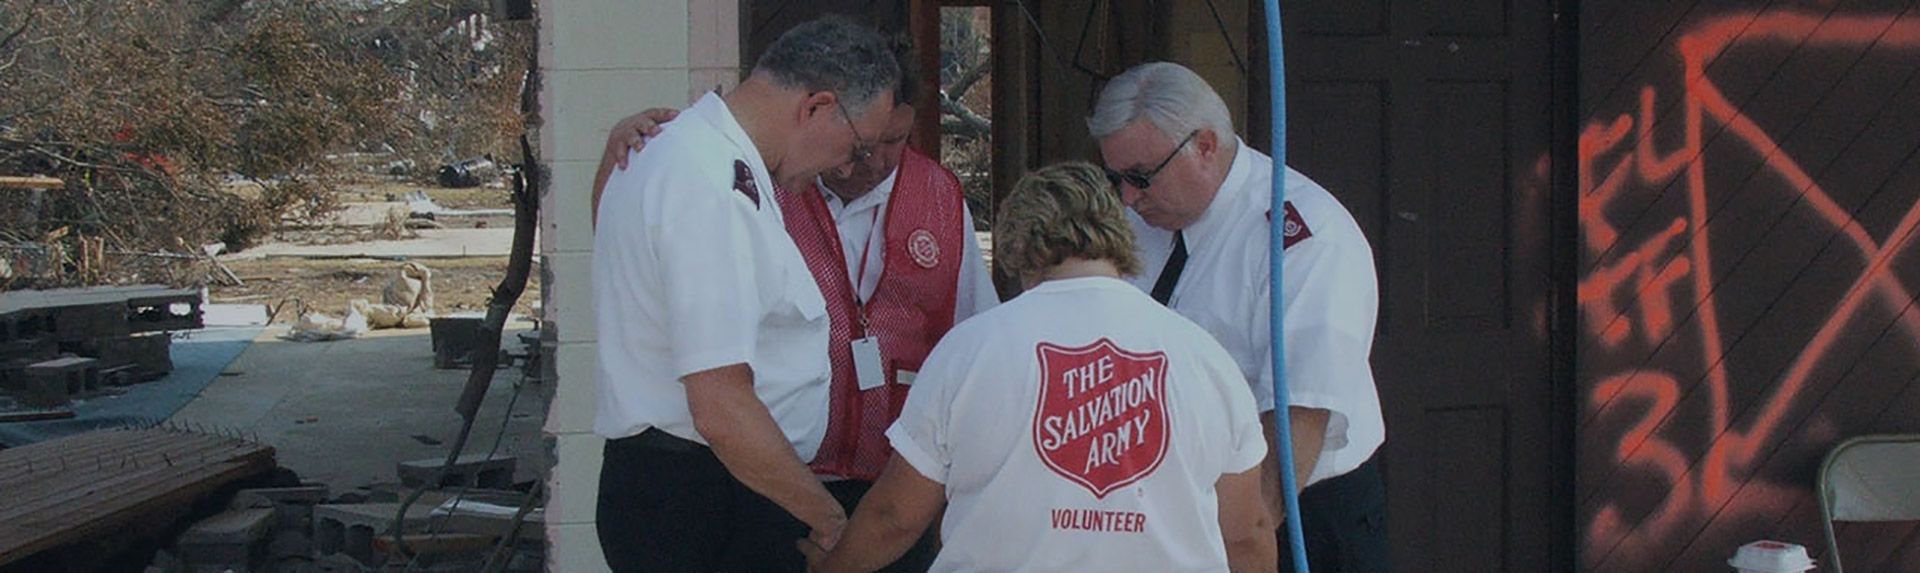 Four Salvation Army workers praying together